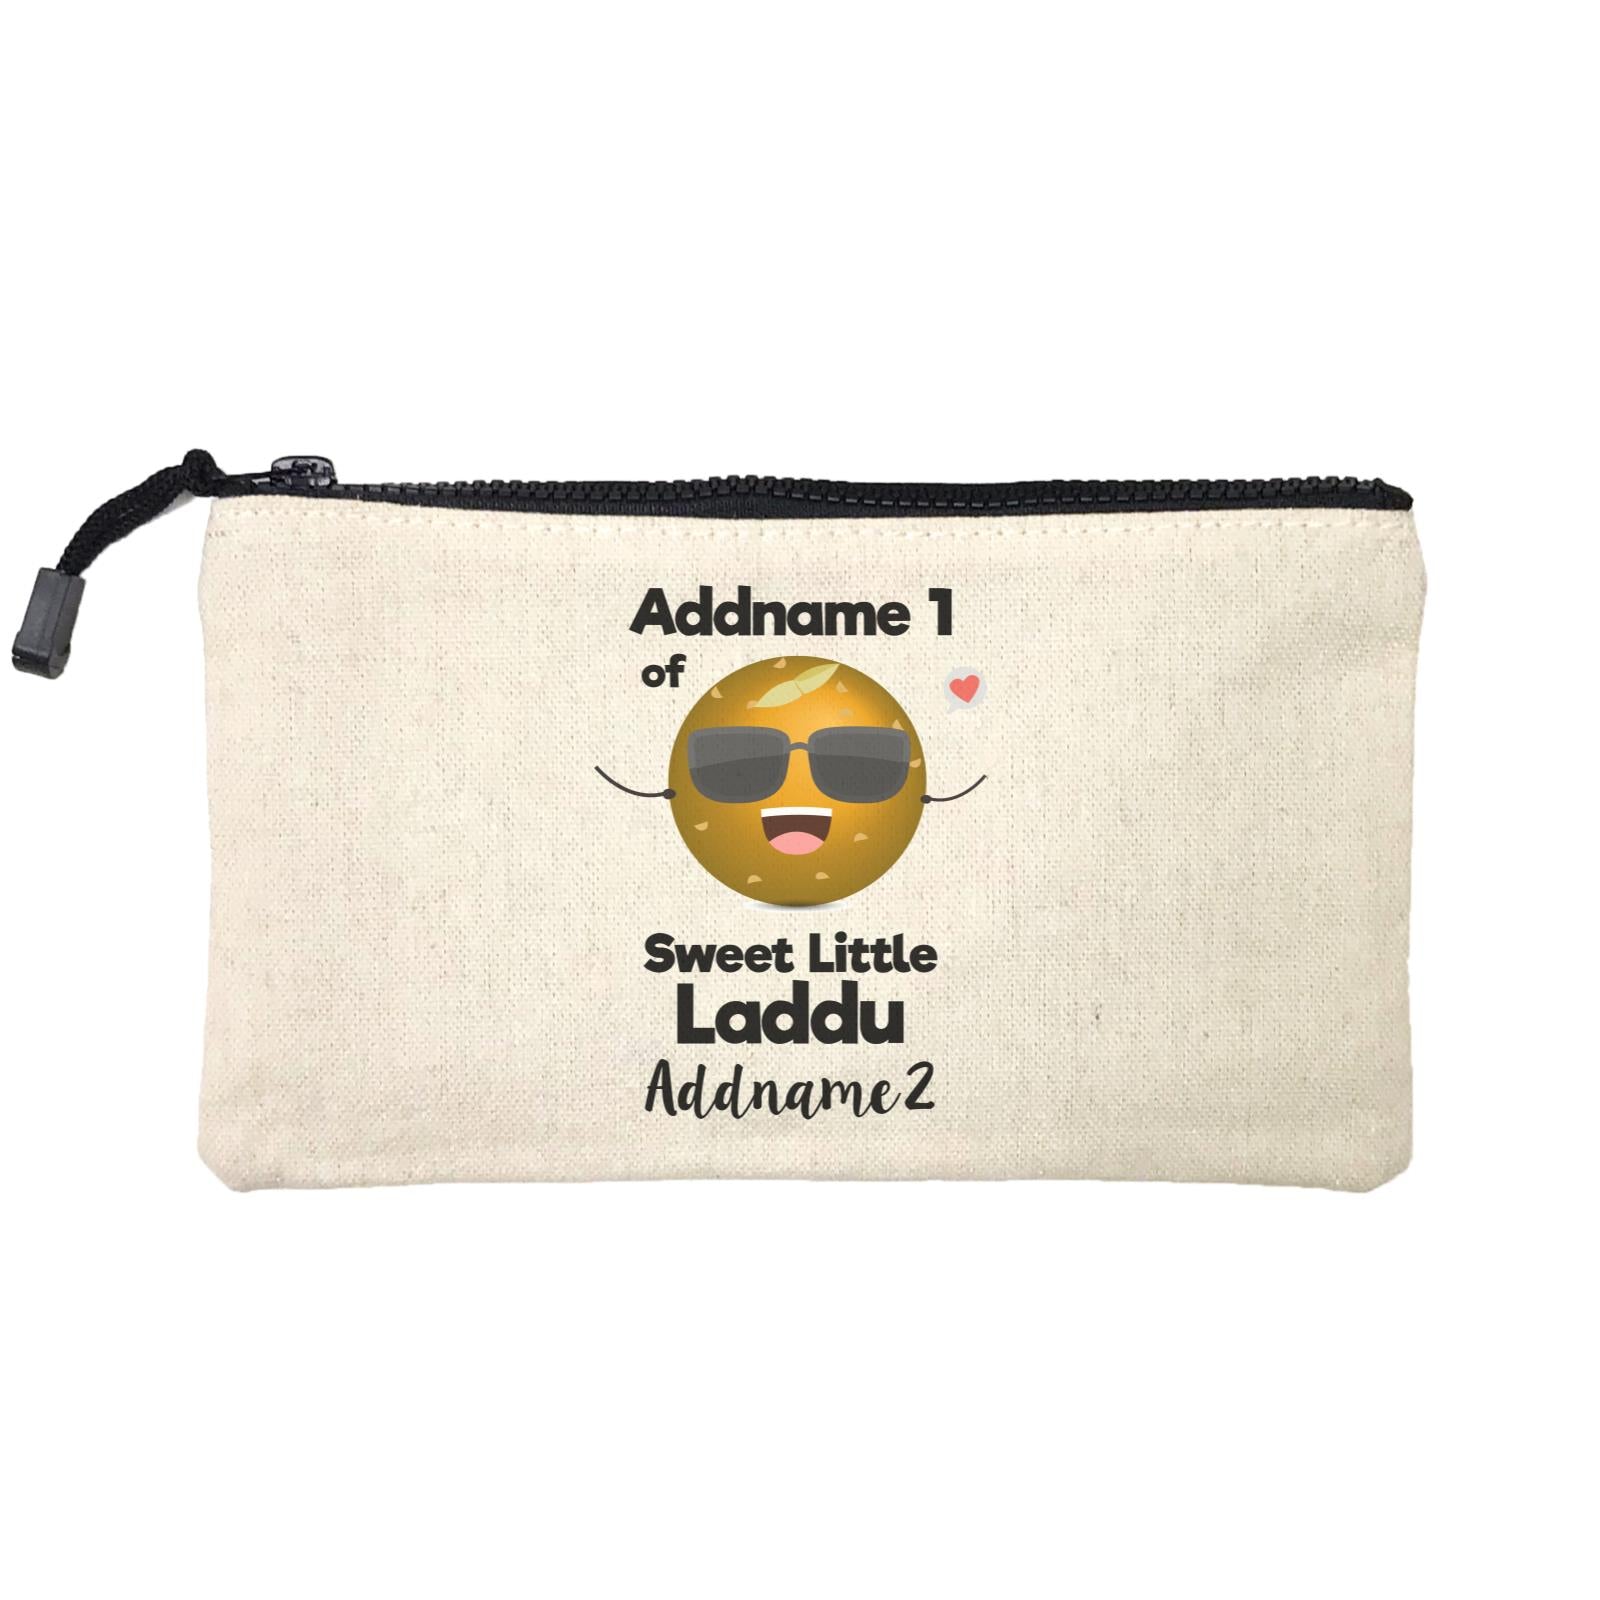 Addname 1 of Sweet Little Laddu Addname 2 Mini Accessories Stationery Pouch